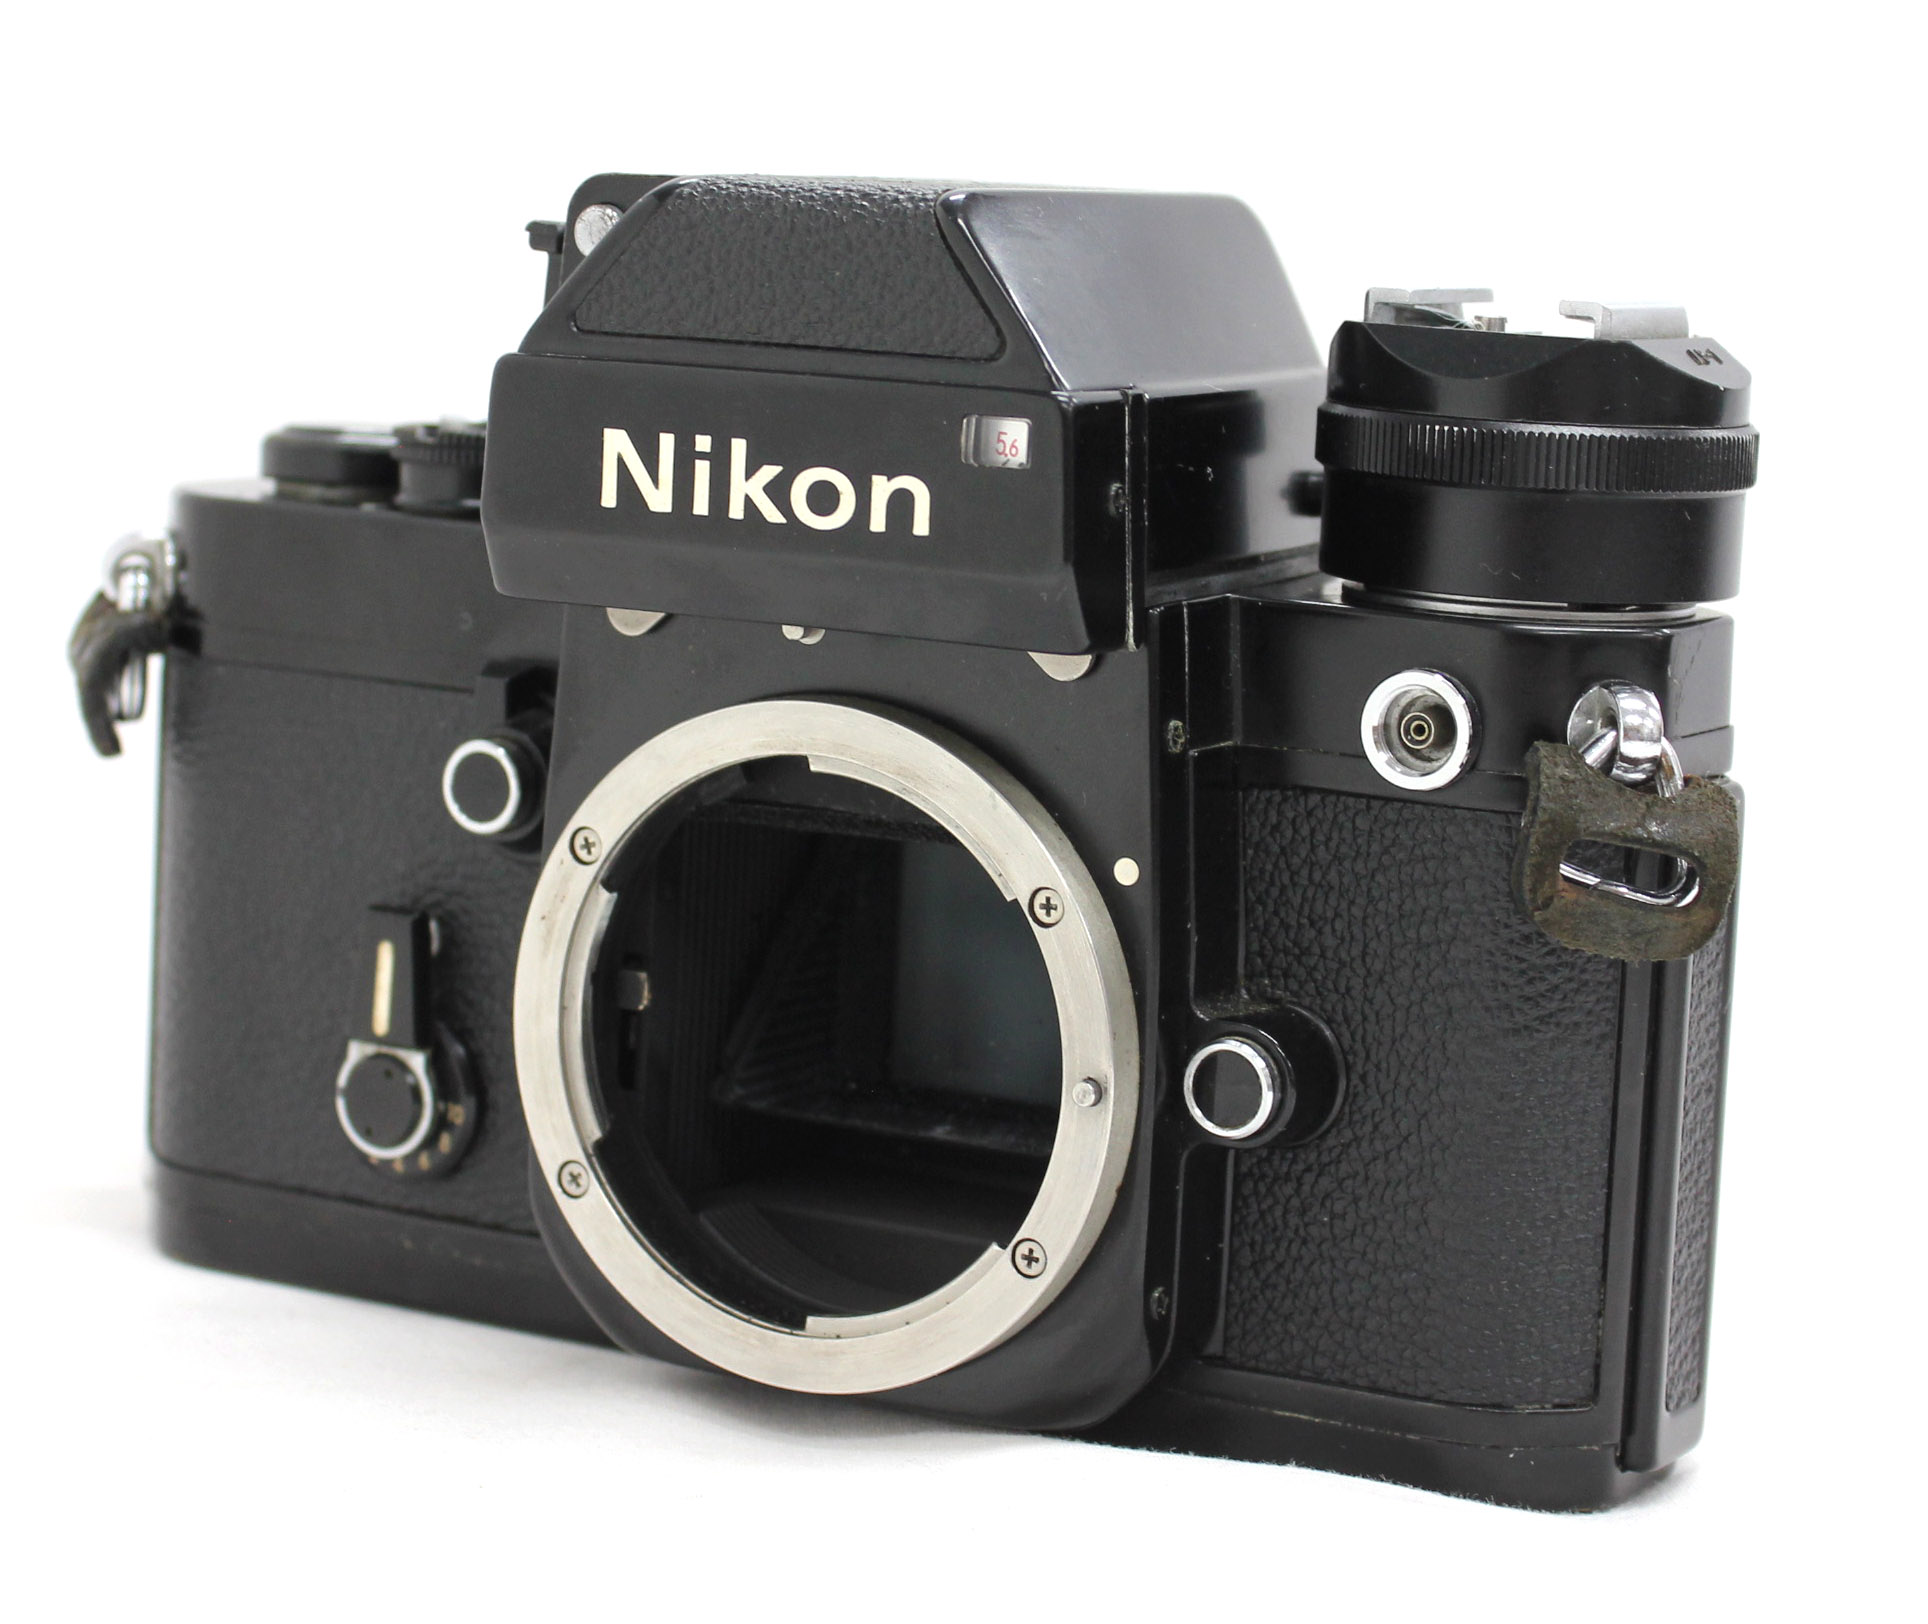 Nikon F2 Photomic DP-1 Black with Nikkor S.C 50mm F/1.4 Lens and 